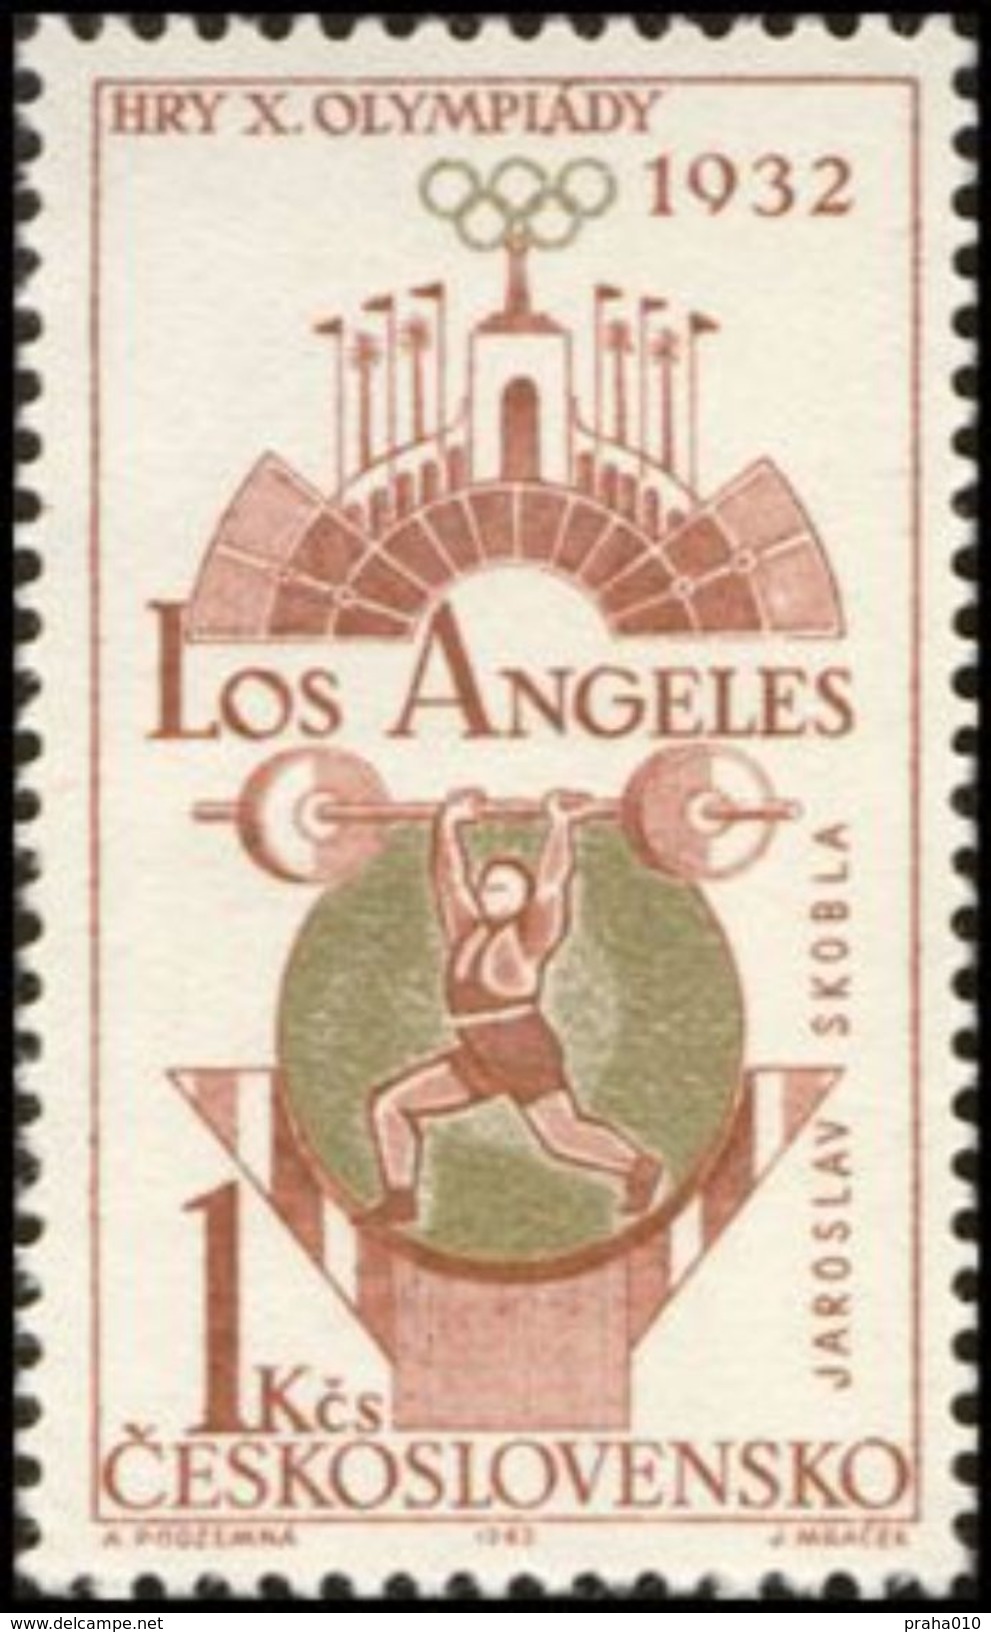 Czechoslovakia / Stamps (1965) 1431: Olympic Games 1932 Los Angeles, J. Skobla (weight-lifting); Painter: A. Podzemna - Summer 1932: Los Angeles